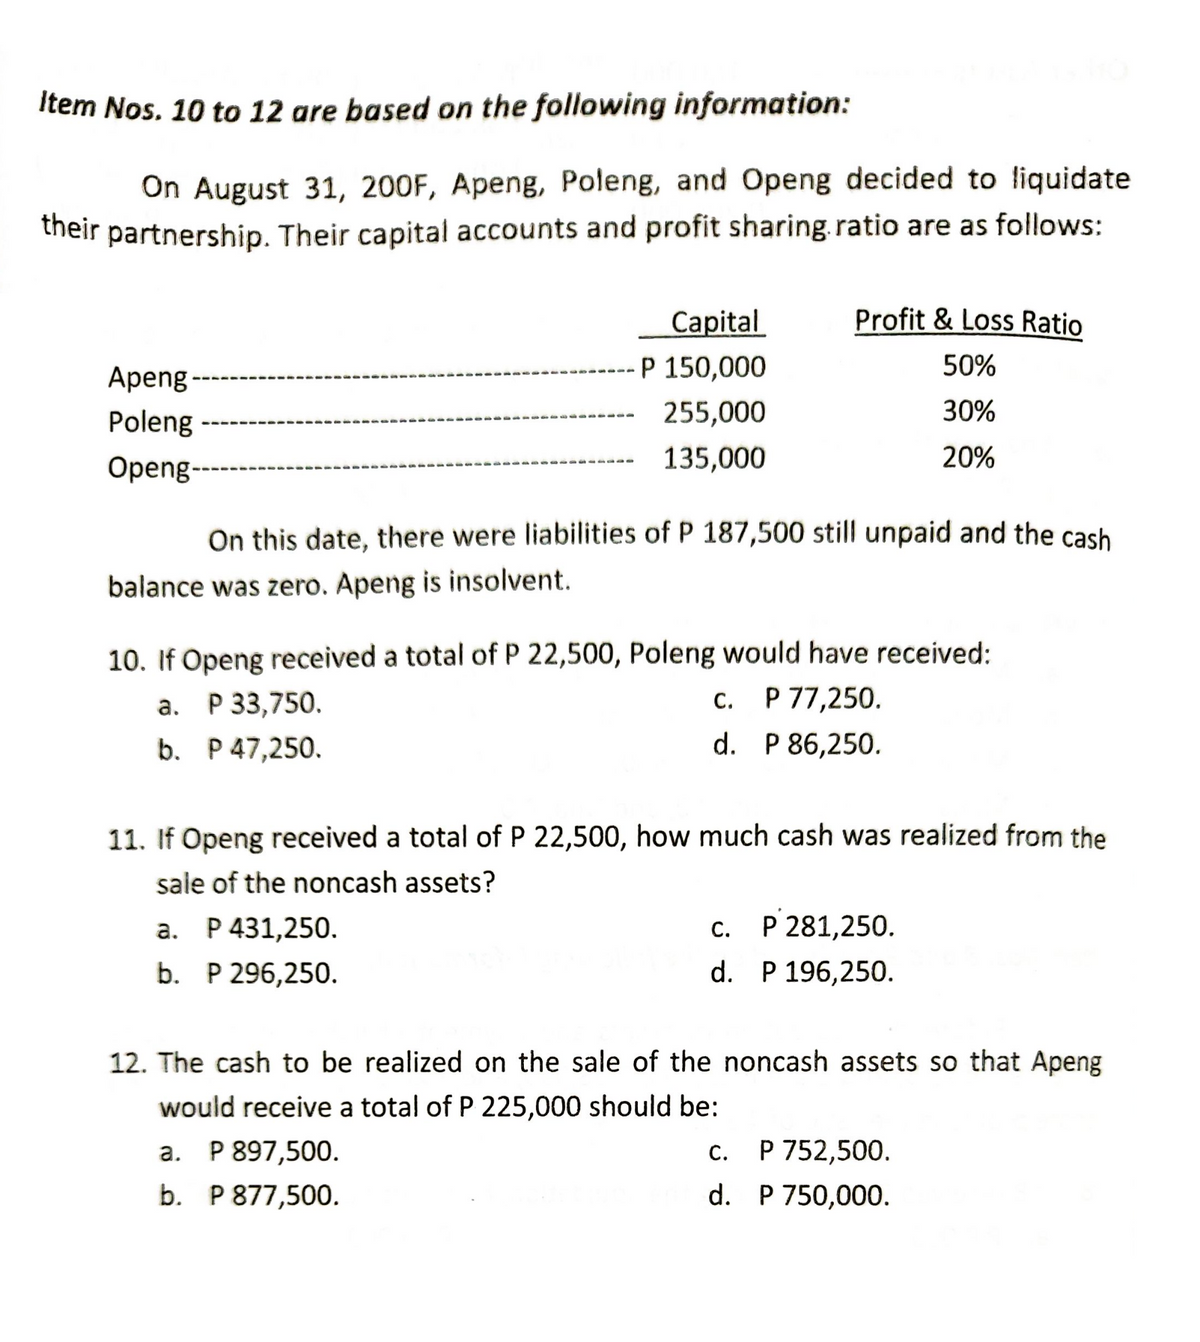 Item Nos. 10 to 12 are based on the following information:
On August 31, 200F, Apeng, Poleng, and Openg decided to liquidate
their partnership. Their capital accounts and profit sharing. ratio are as follows:
Capital
Profit & Loss Ratio
P 150,000
50%
Apeng
255,000
Poleng
30%
135,000
20%
Openg-
On this date, there were liabilities of P 187,500 still unpaid and the cash
balance was zero. Apeng is insolvent.
10. If Openg received a total of P 22,500, Poleng would have received:
a. P 33,750.
C. P 77,250.
b. P 47,250.
d. P 86,250.
11. If Openg received a total of P 22,500, how much cash was realized from the
sale of the noncash assets?
a. P 431,250.
C. P 281,250.
b. P 296,250.
d. P 196,250.
12. The cash to be realized on the sale of the noncash assets so that Apeng
would receive a total of P 225,000 should be:
a. P 897,500.
c.
P 752,500.
b. P 877,500.
d.
P 750,000.